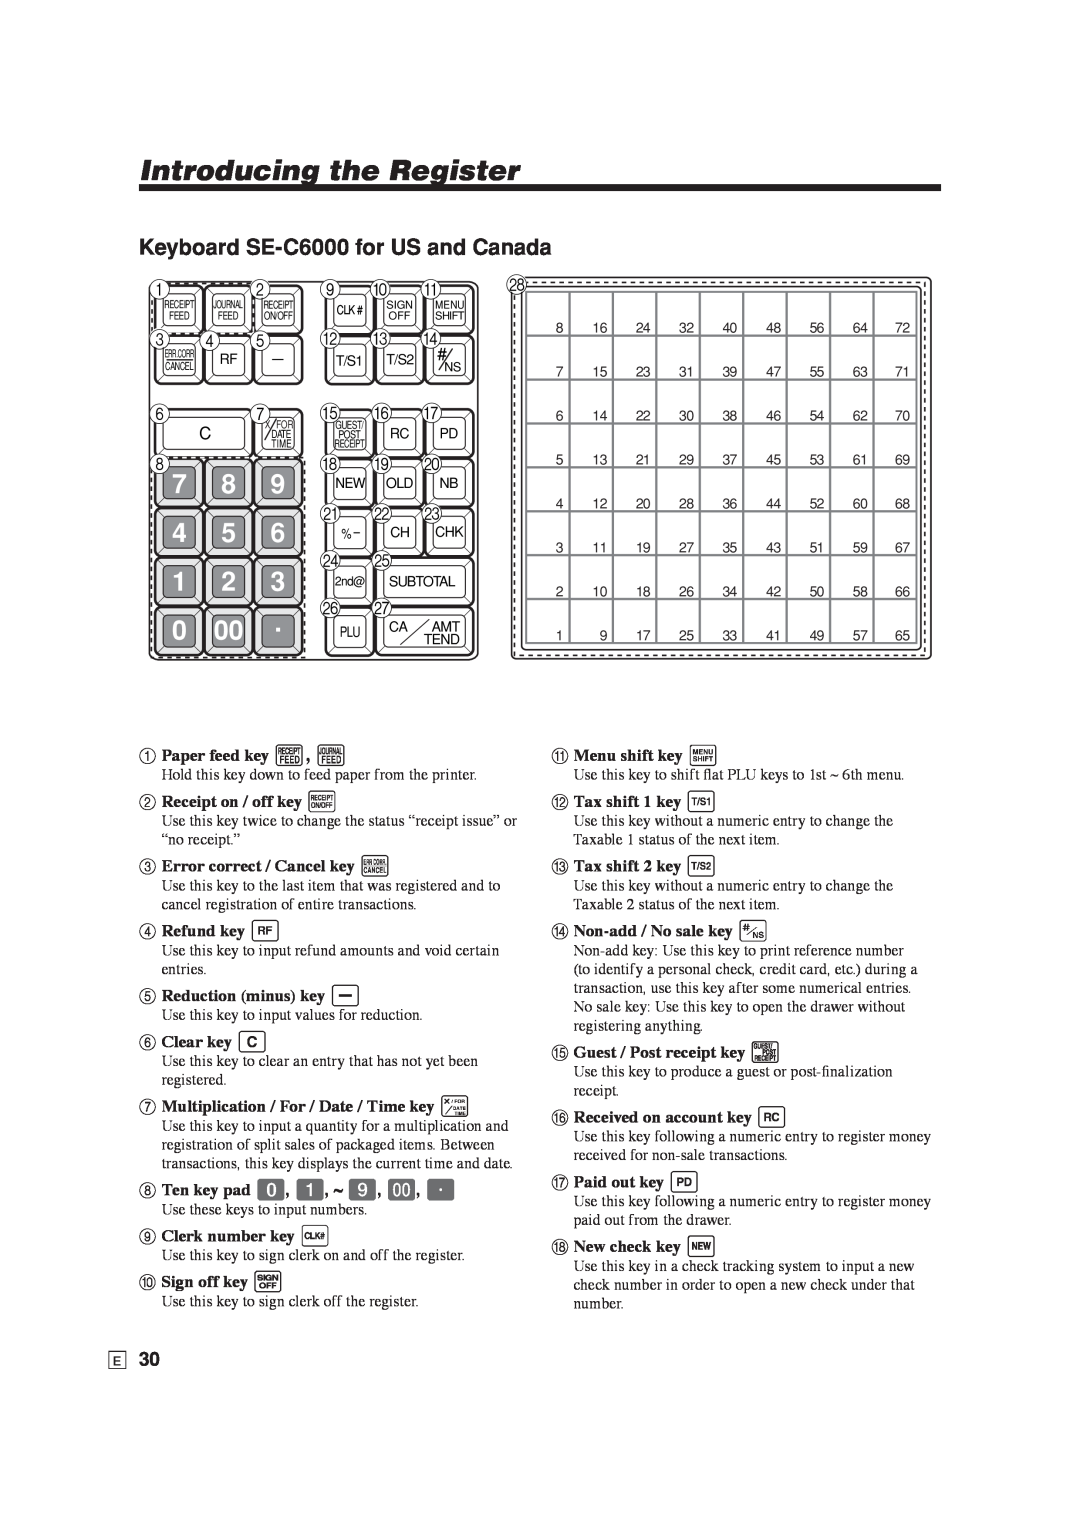 Casio SE-S6000 user manual Keyboard SE-C6000 for US and Canada, Introducing the Register 